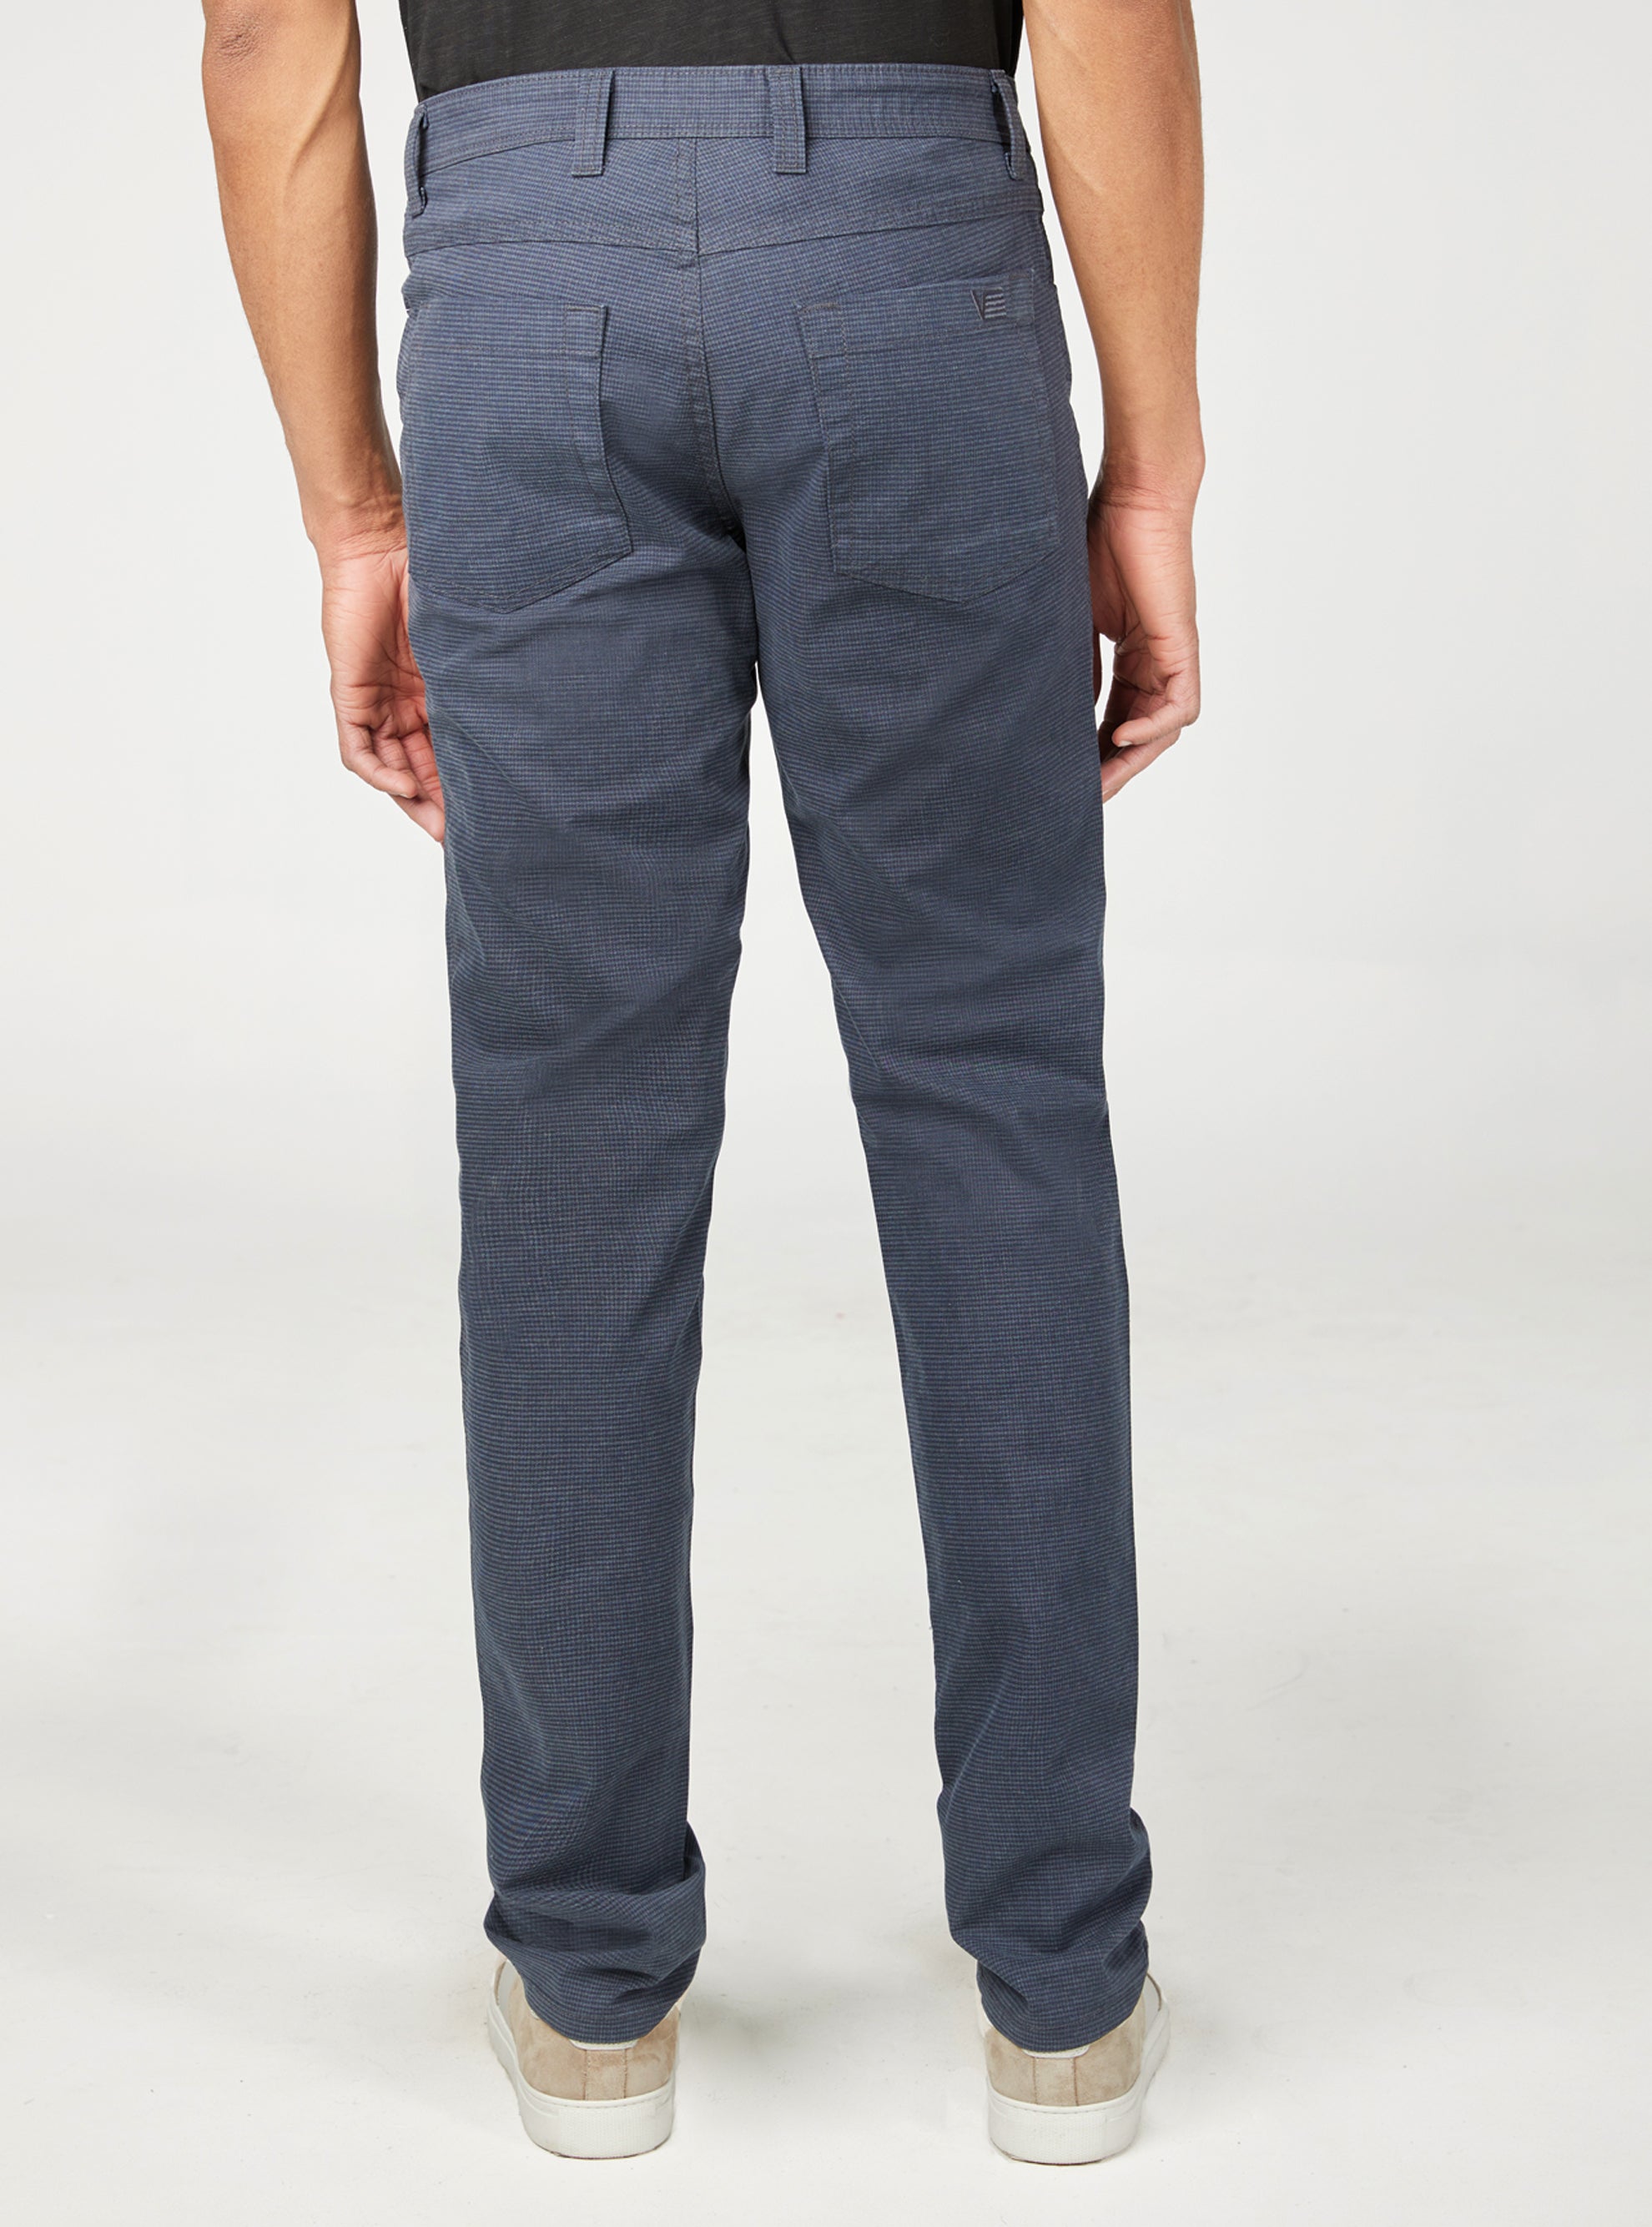 Casual navy jeans style trousers